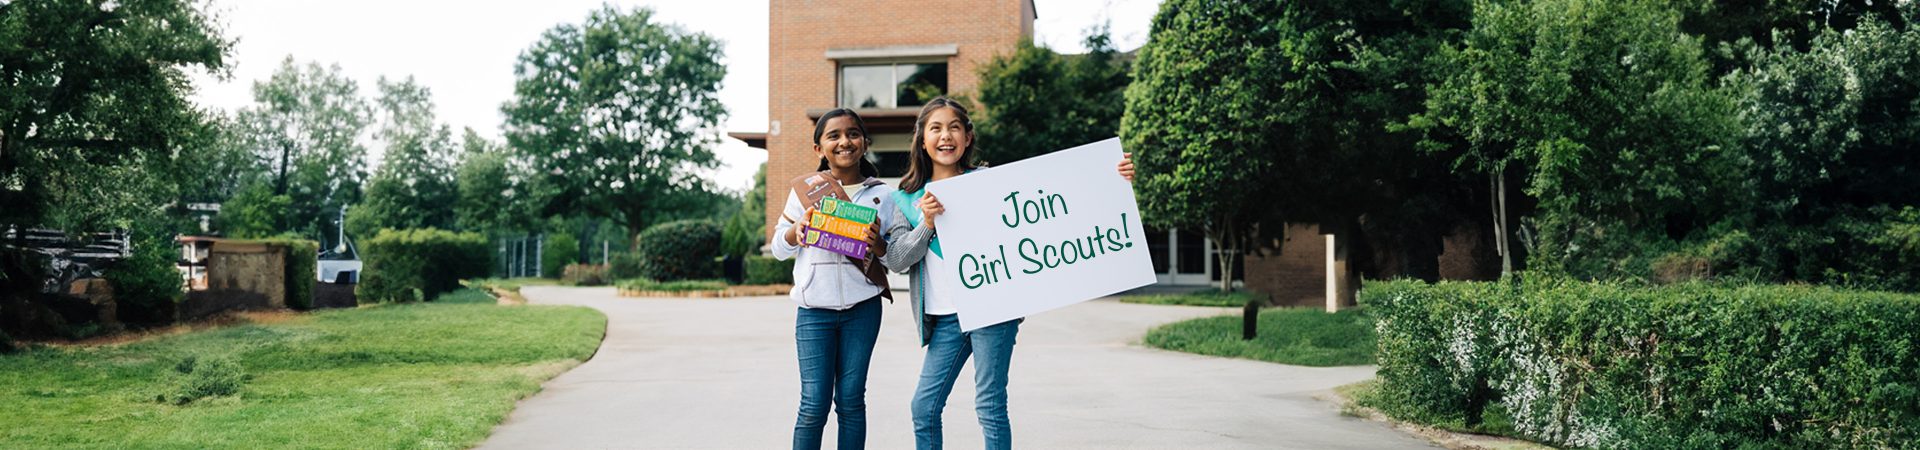  Two Girl Scouts standing on a sidewalk holding a sign that reads "Join Girl Scouts" 